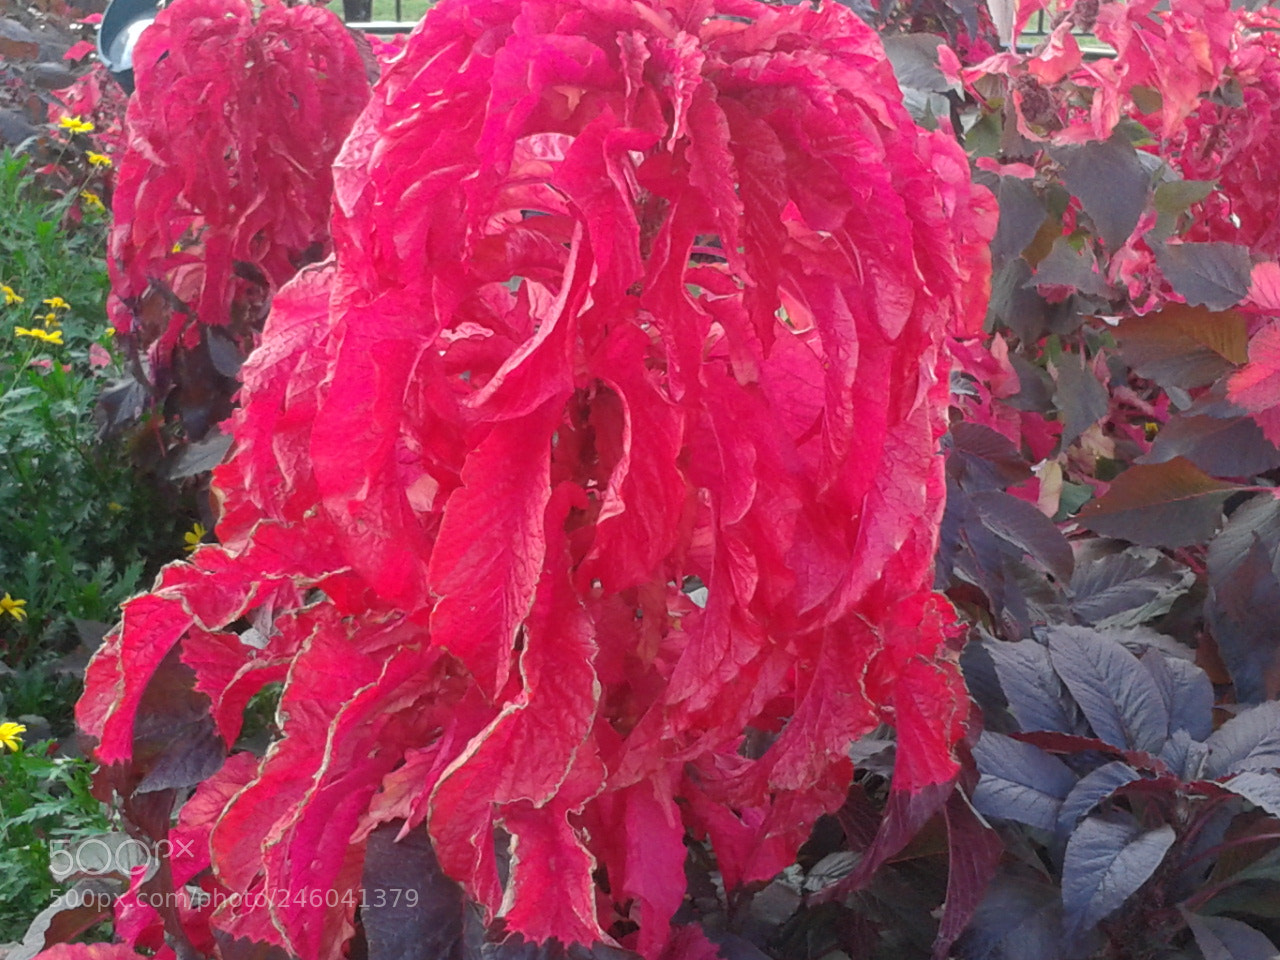 Samsung Galaxy S Stratosphere sample photo. "Brilliant red bush rose" photography